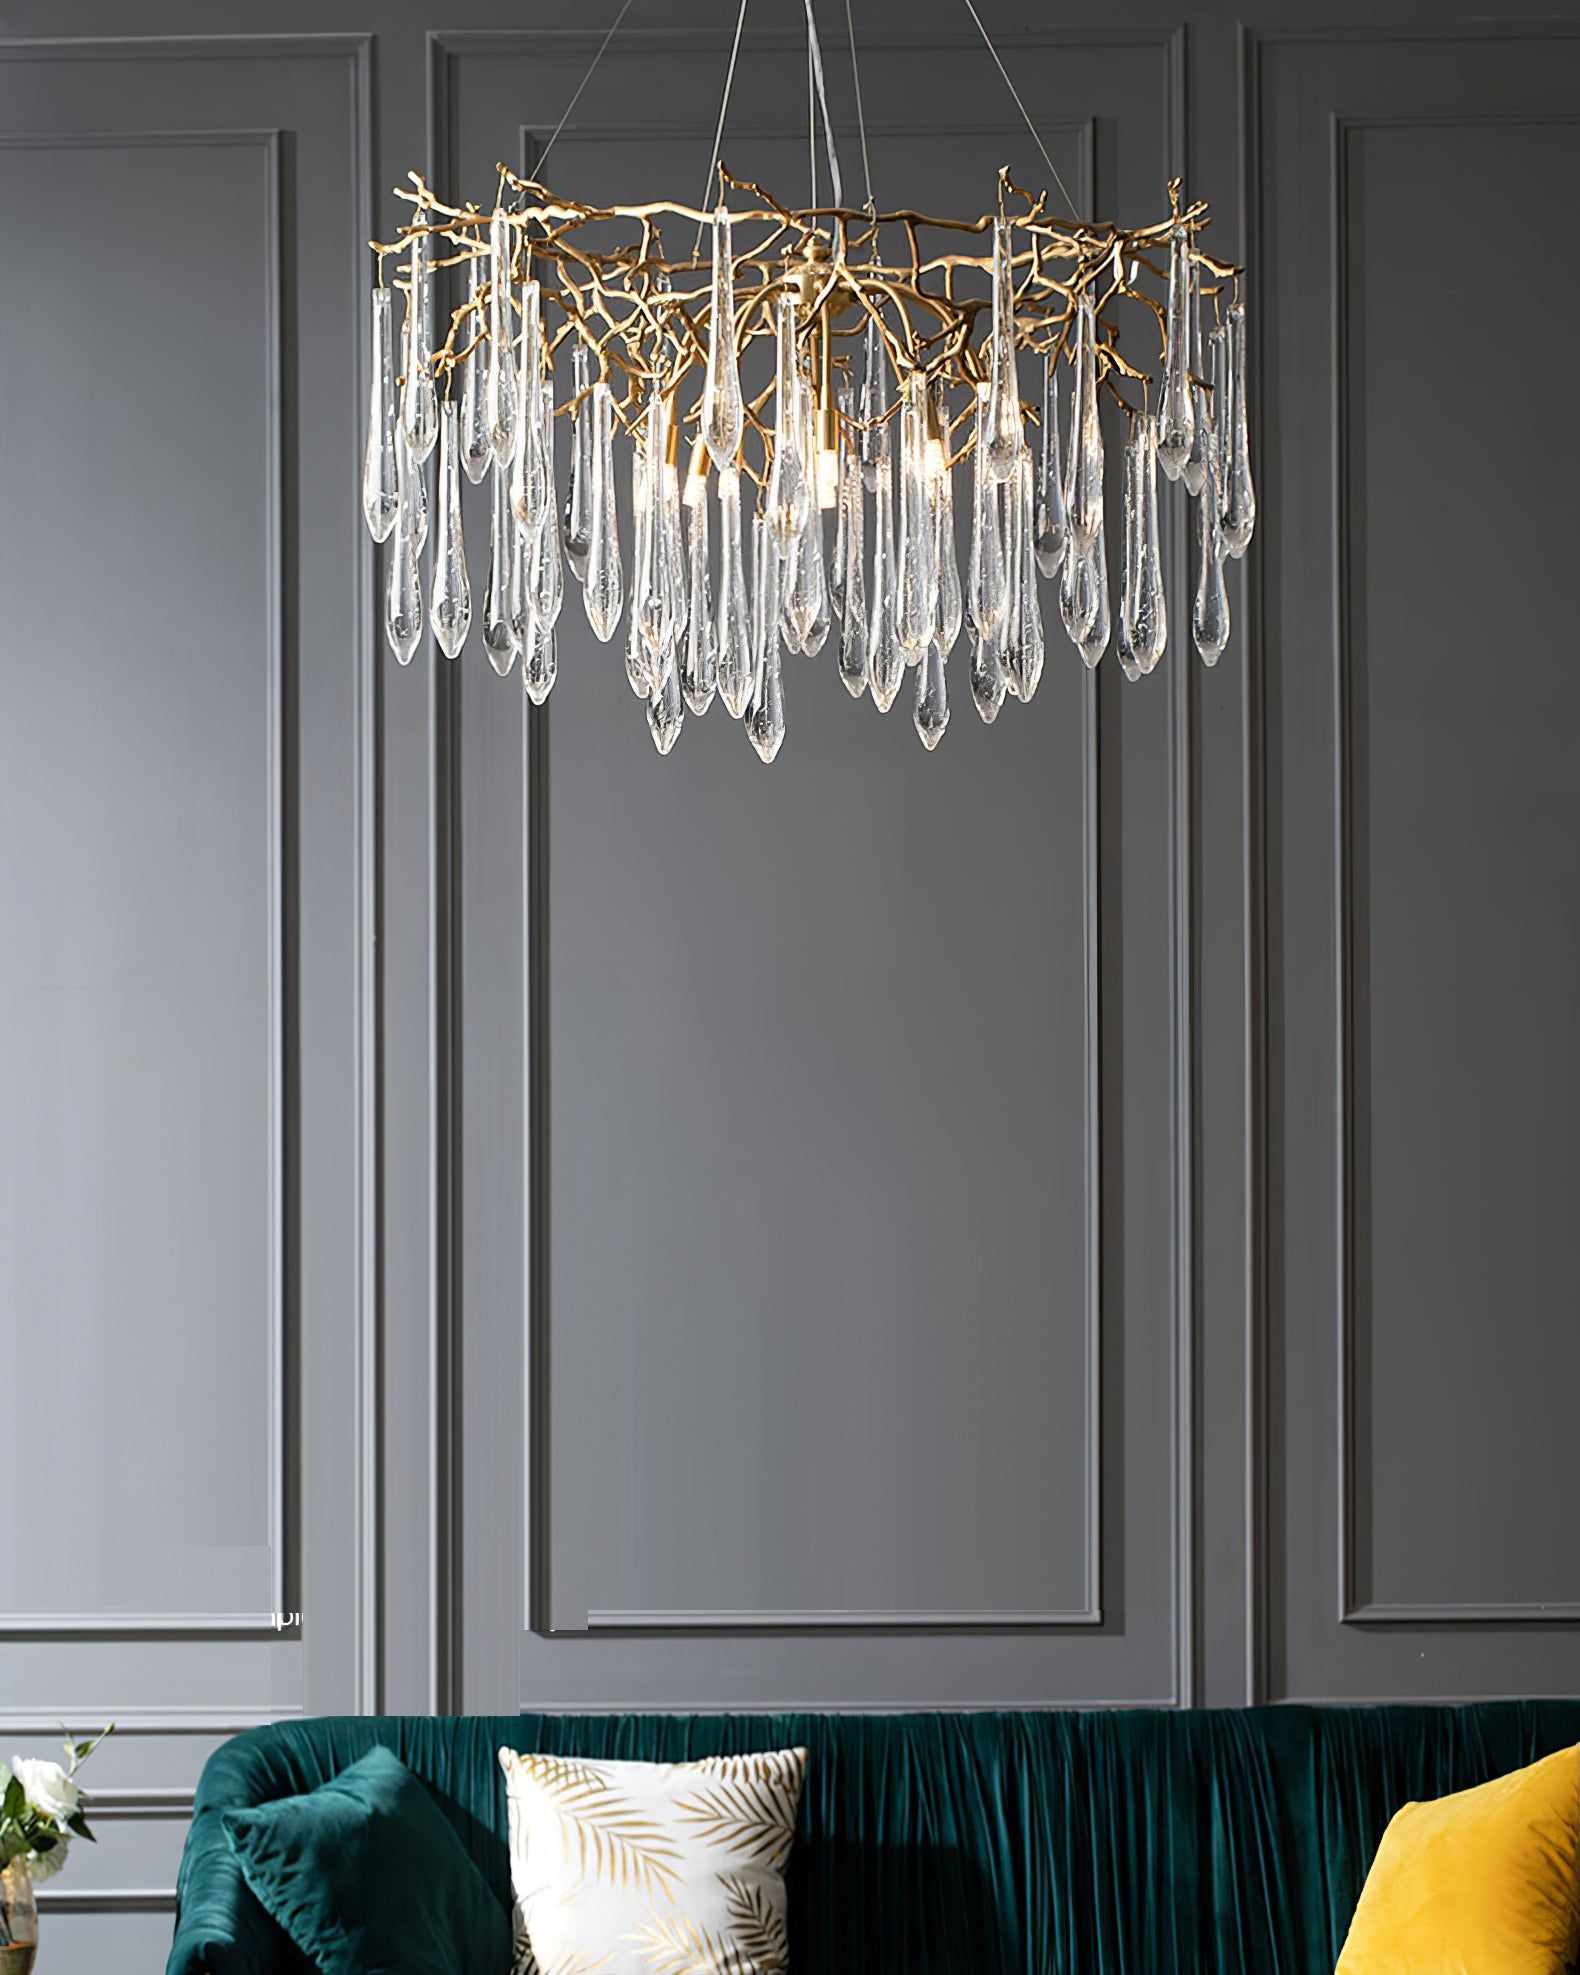 Classic Chandeliers Elegant and Timeless Lighting Fixtures for Your Home